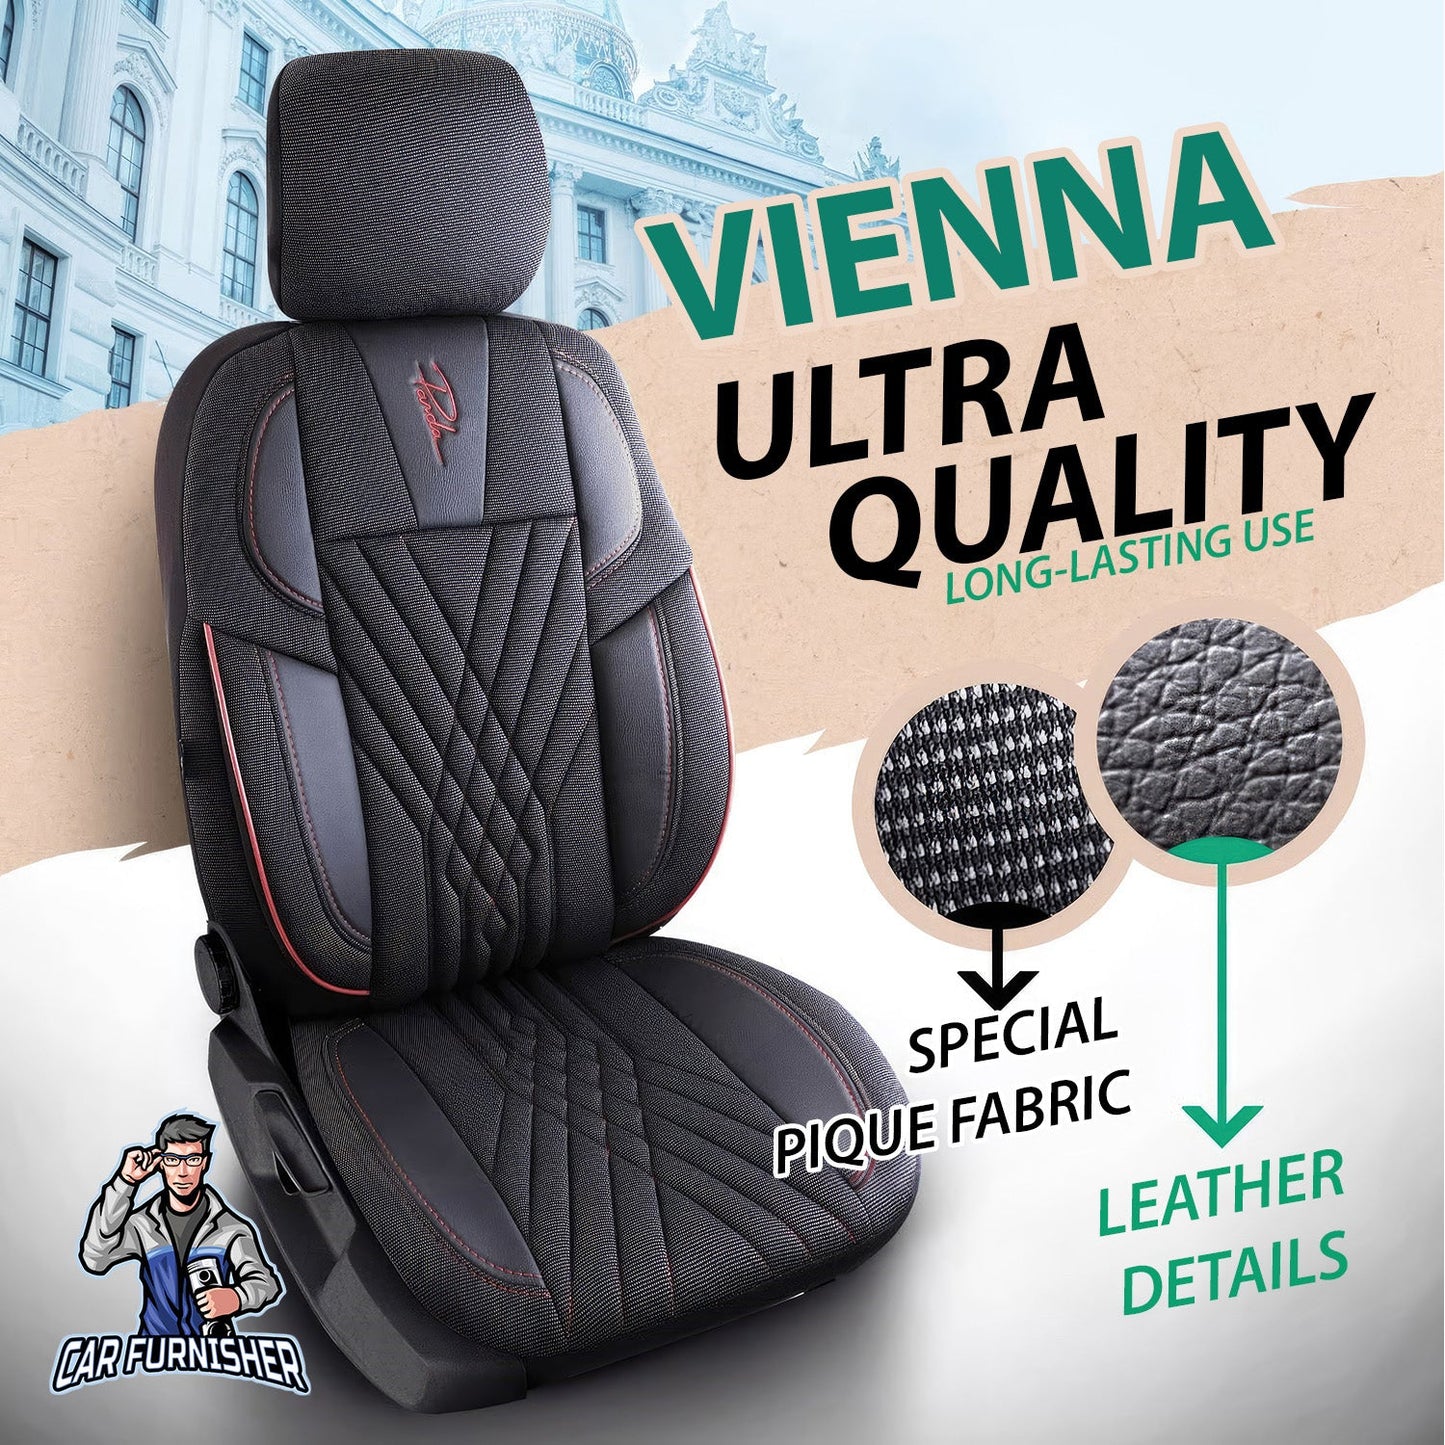 Mercedes 190 Seat Covers Vienna Design Dark Red 5 Seats + Headrests (Full Set) Leather & Pique Fabric